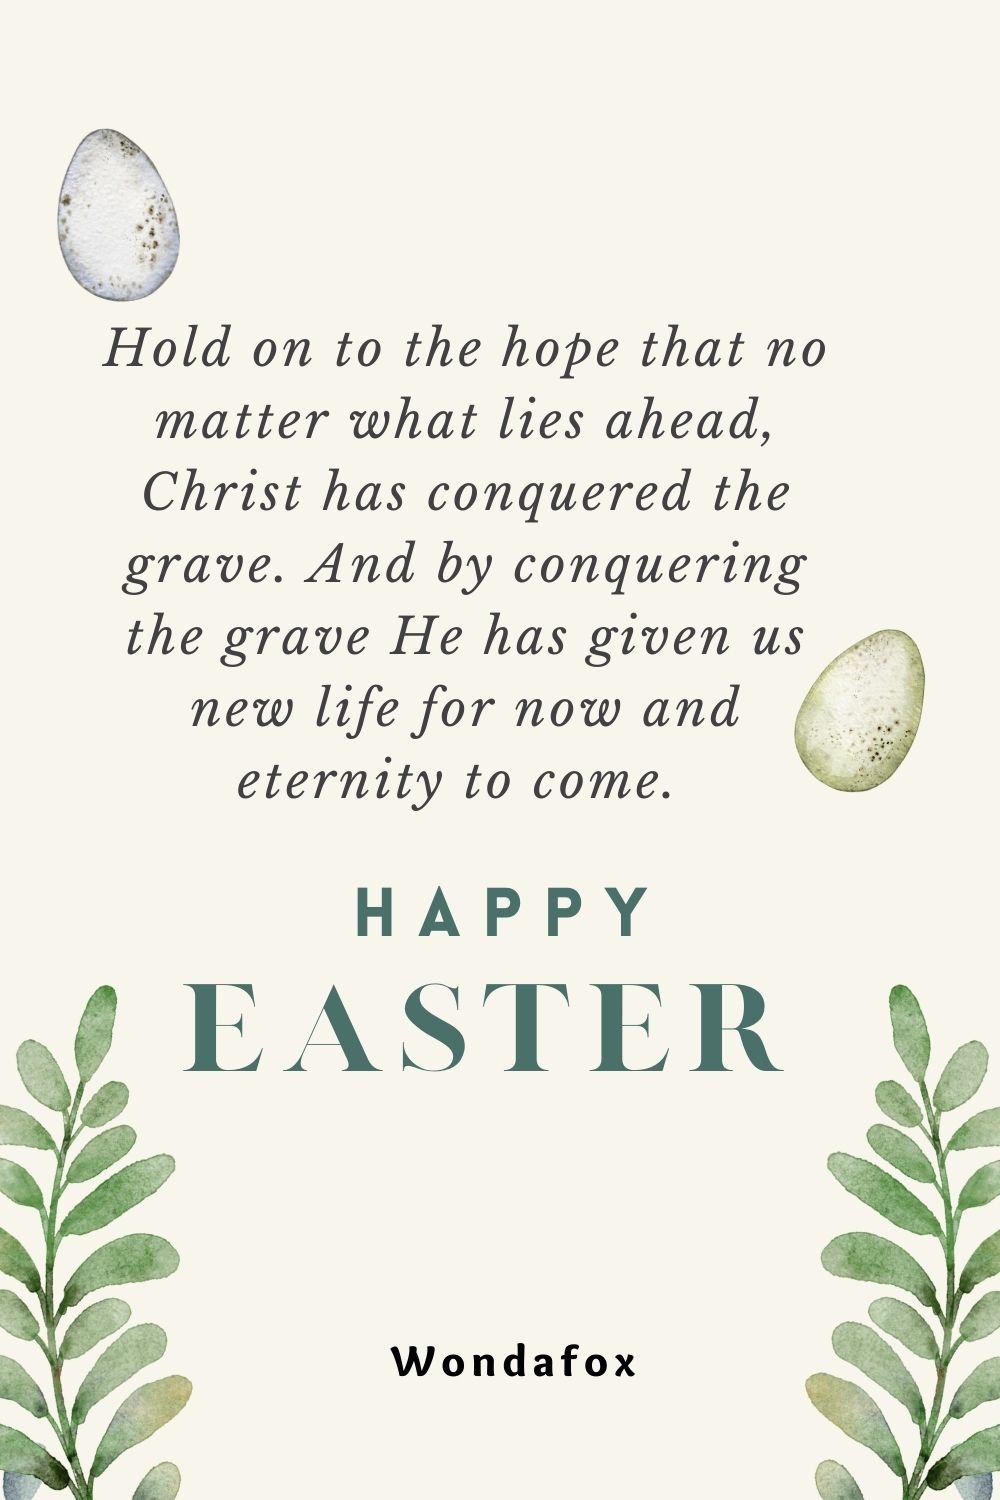 Hold on to the hope that no matter what lies ahead, Christ has conquered the grave. And by conquering the grave He has given us new life for now and eternity to come. Happy Easter.